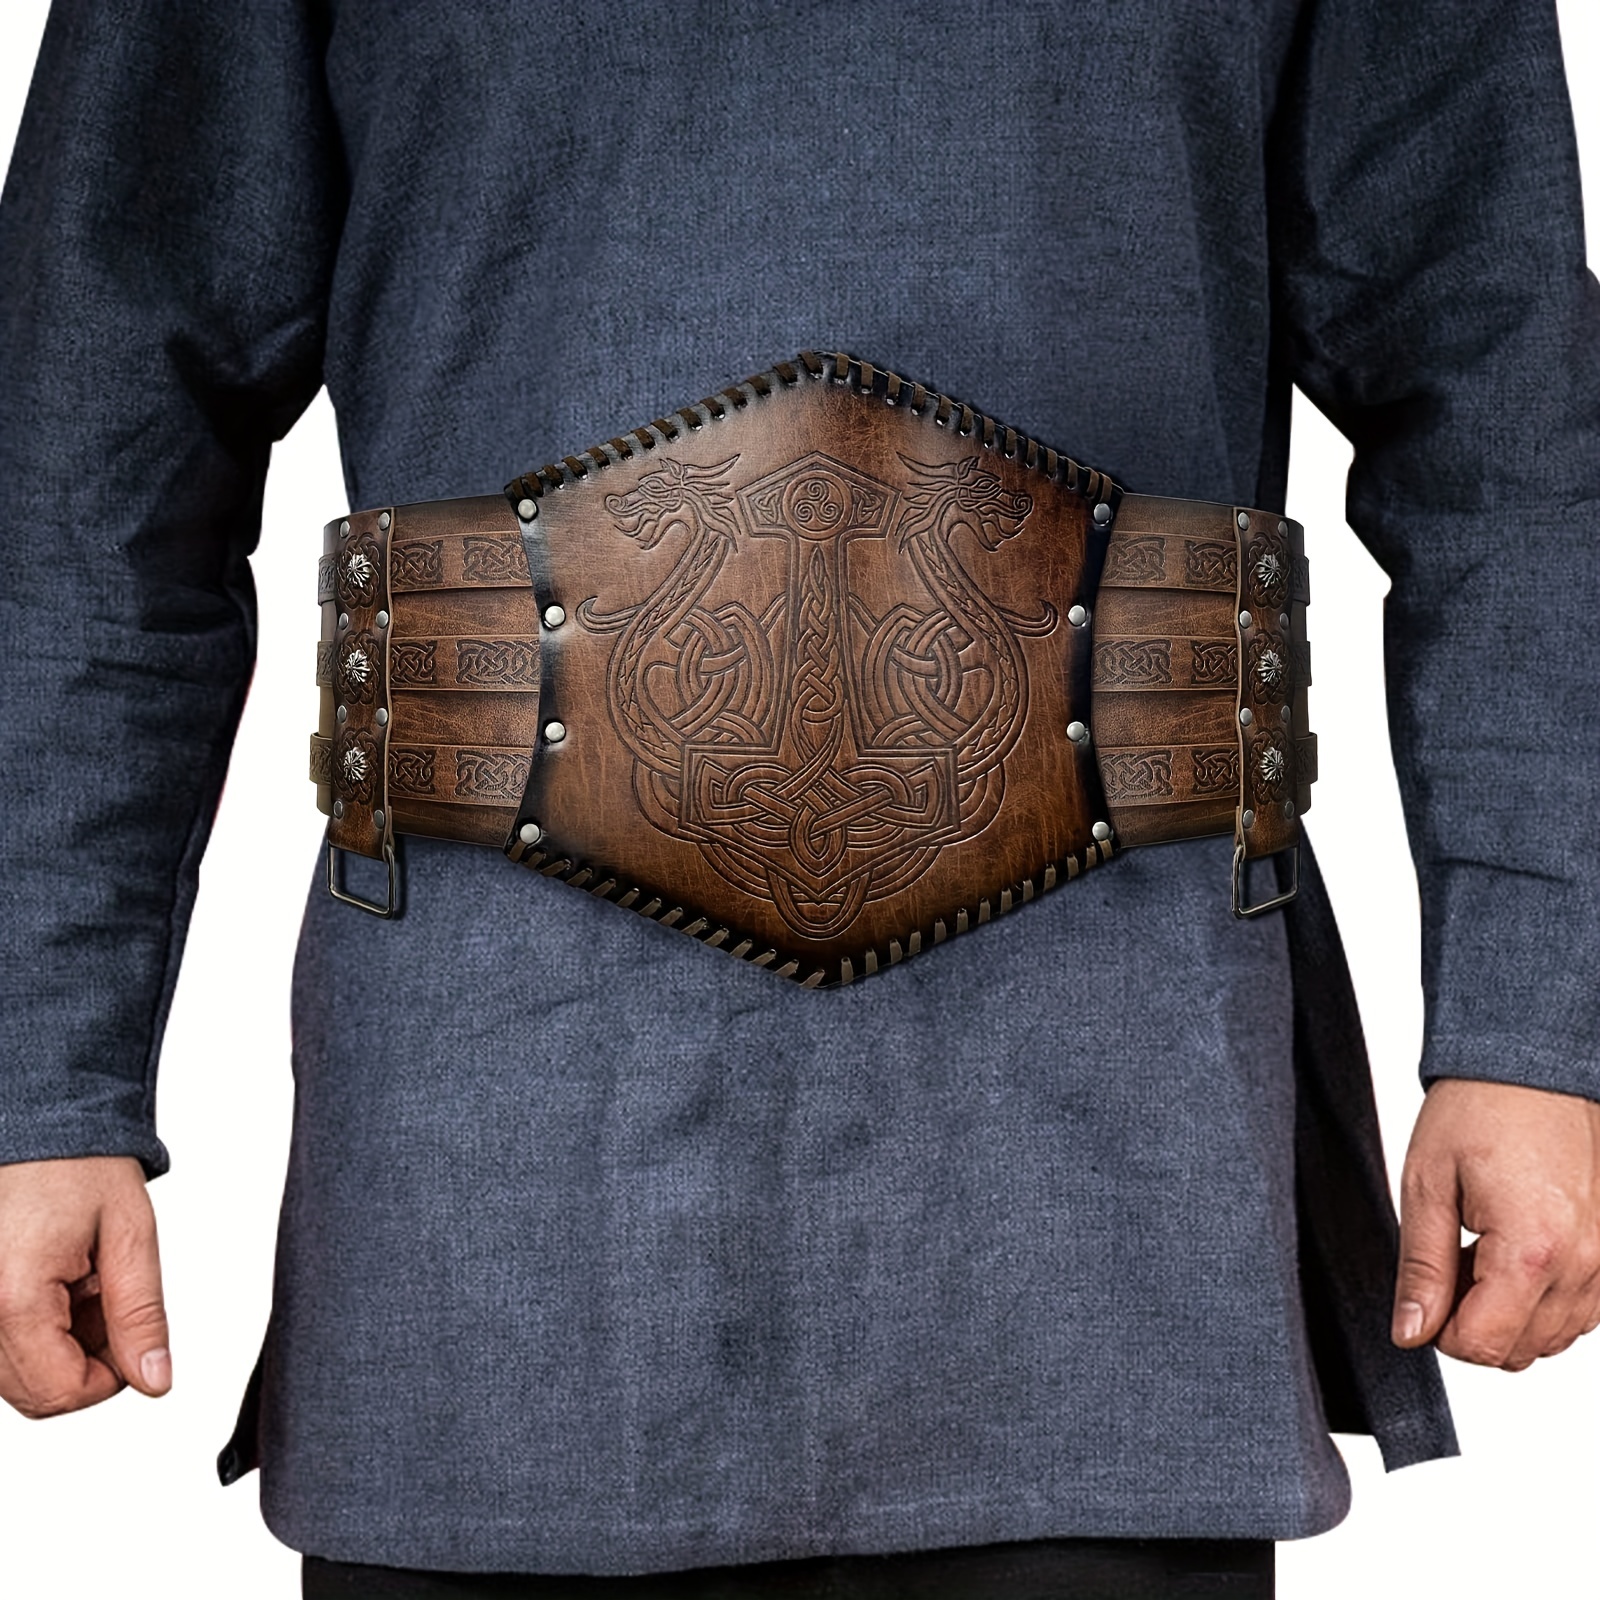 Viking Leather Corset, Medieval Leather Under-bust Corset, LARP